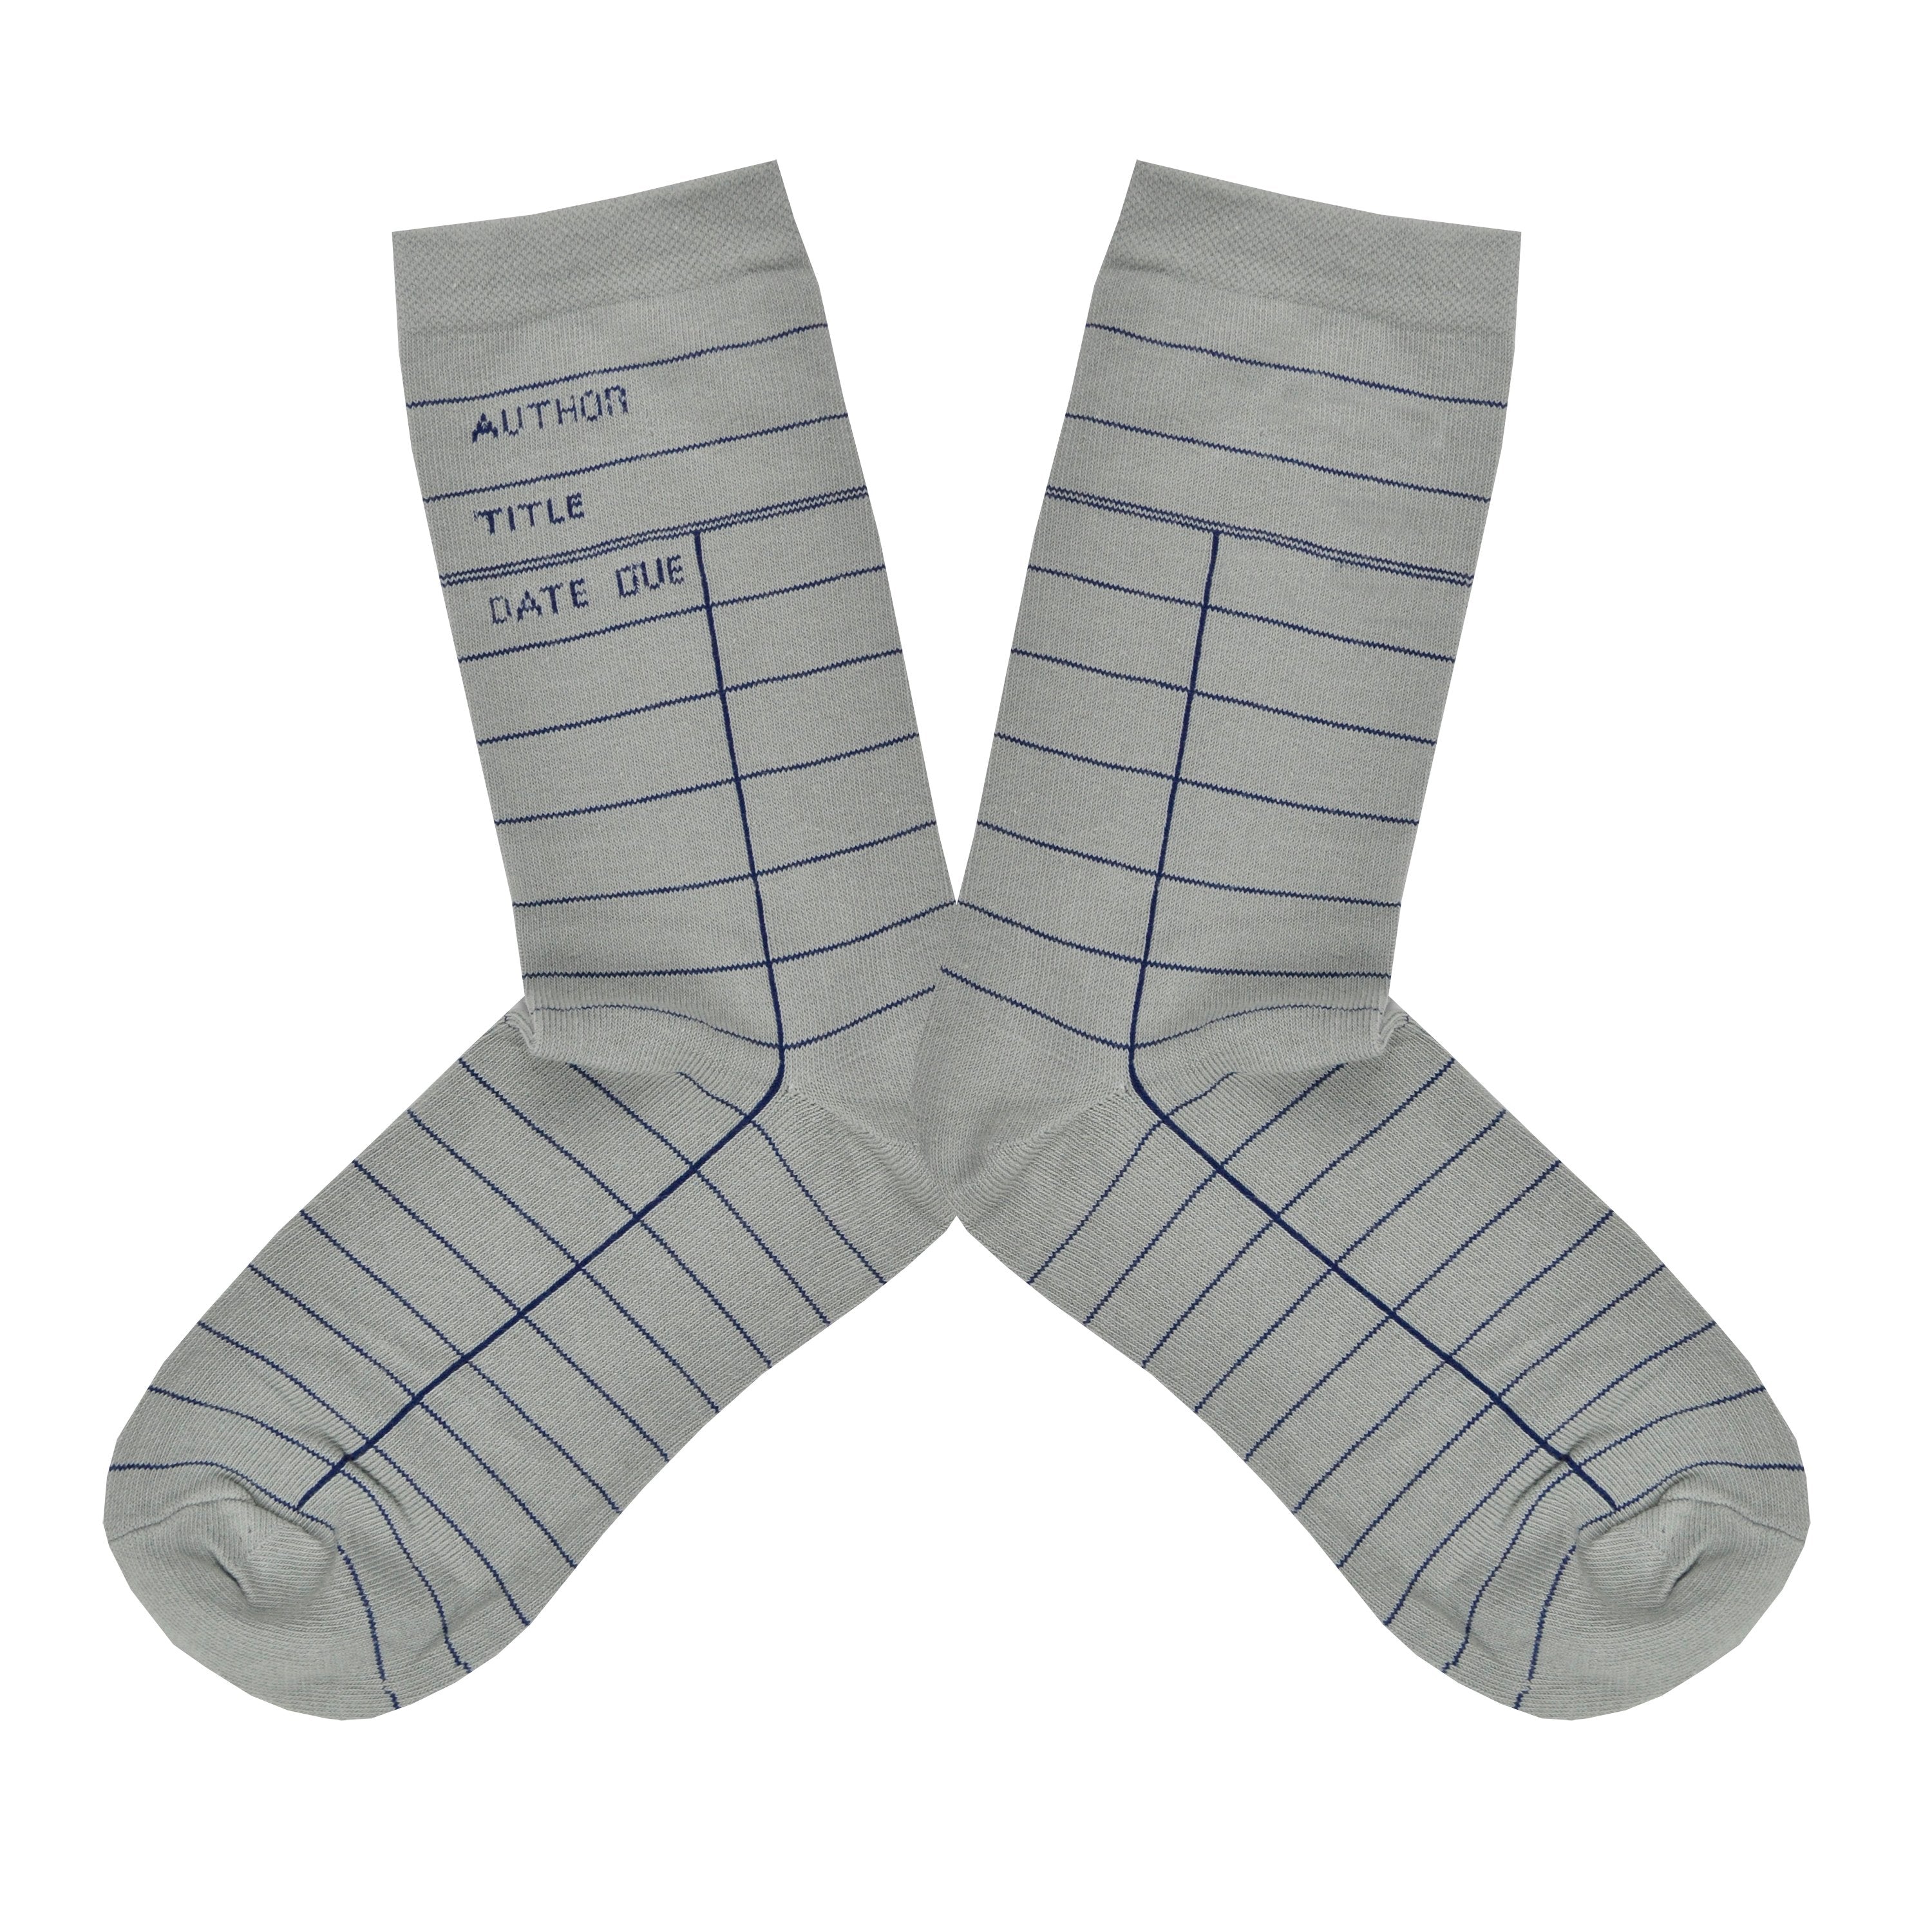 These gray cotton unisex crew socks by the brand Out of Print feature the iconic library card design with the words 